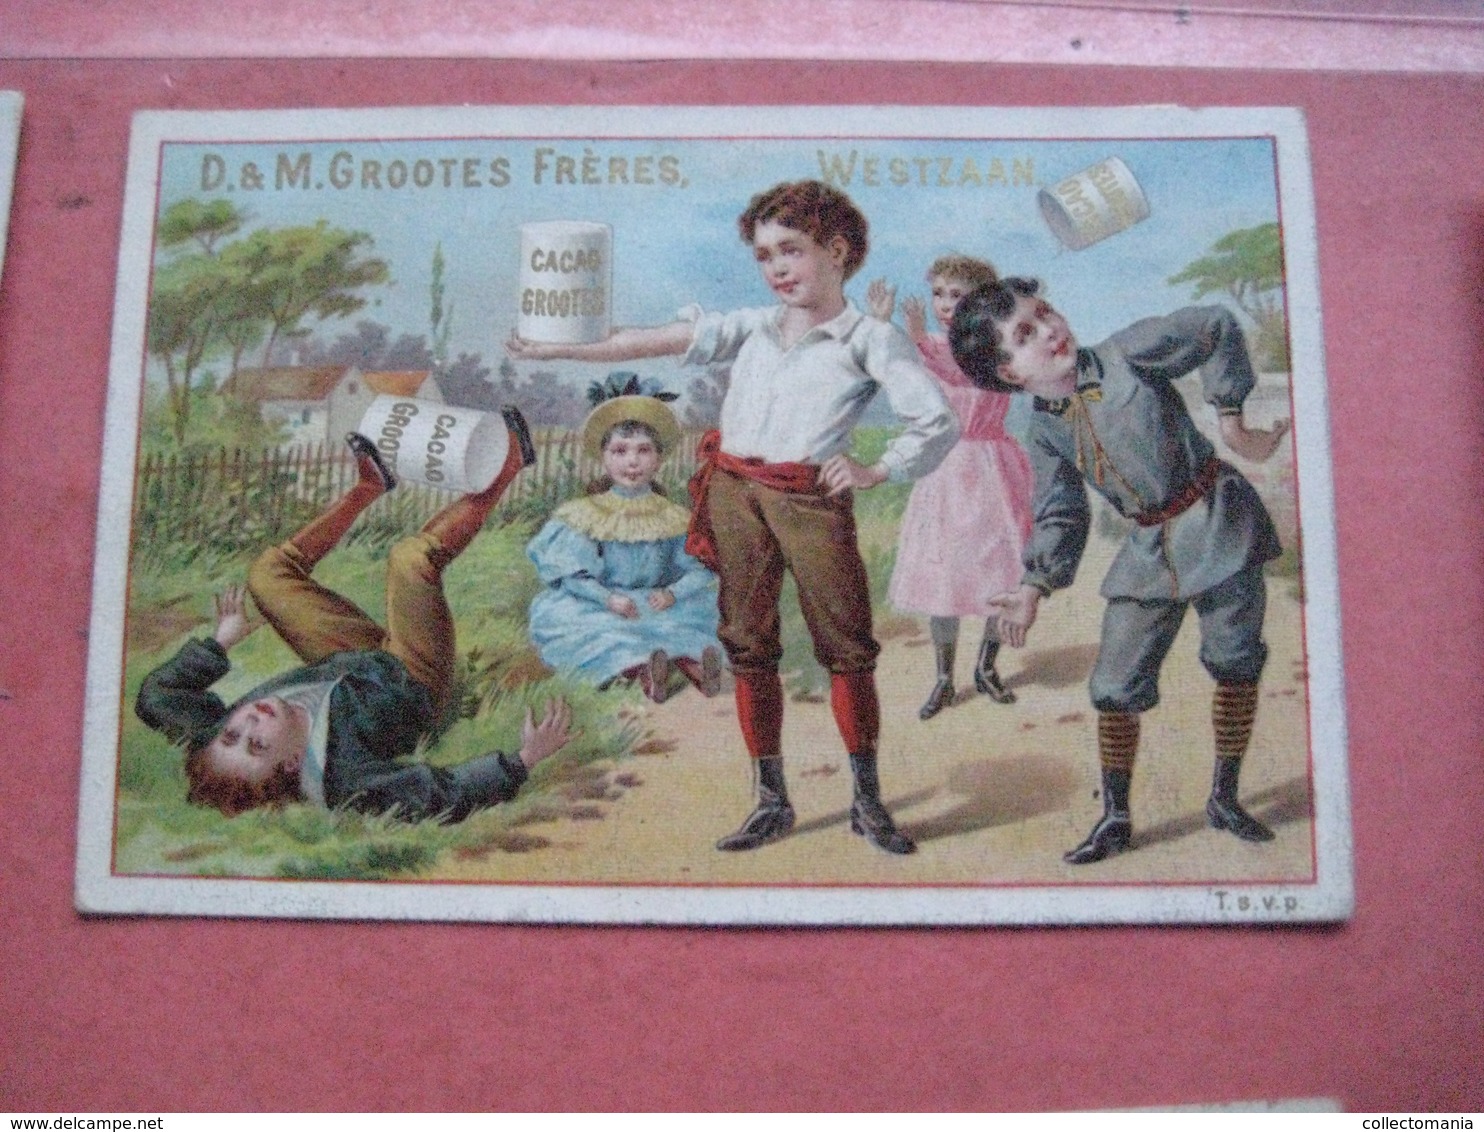 12 chromos trade cards cacao chokolade chocolat Pub. D. & M. GROOTES c1894 lithography children playing with cacao tins